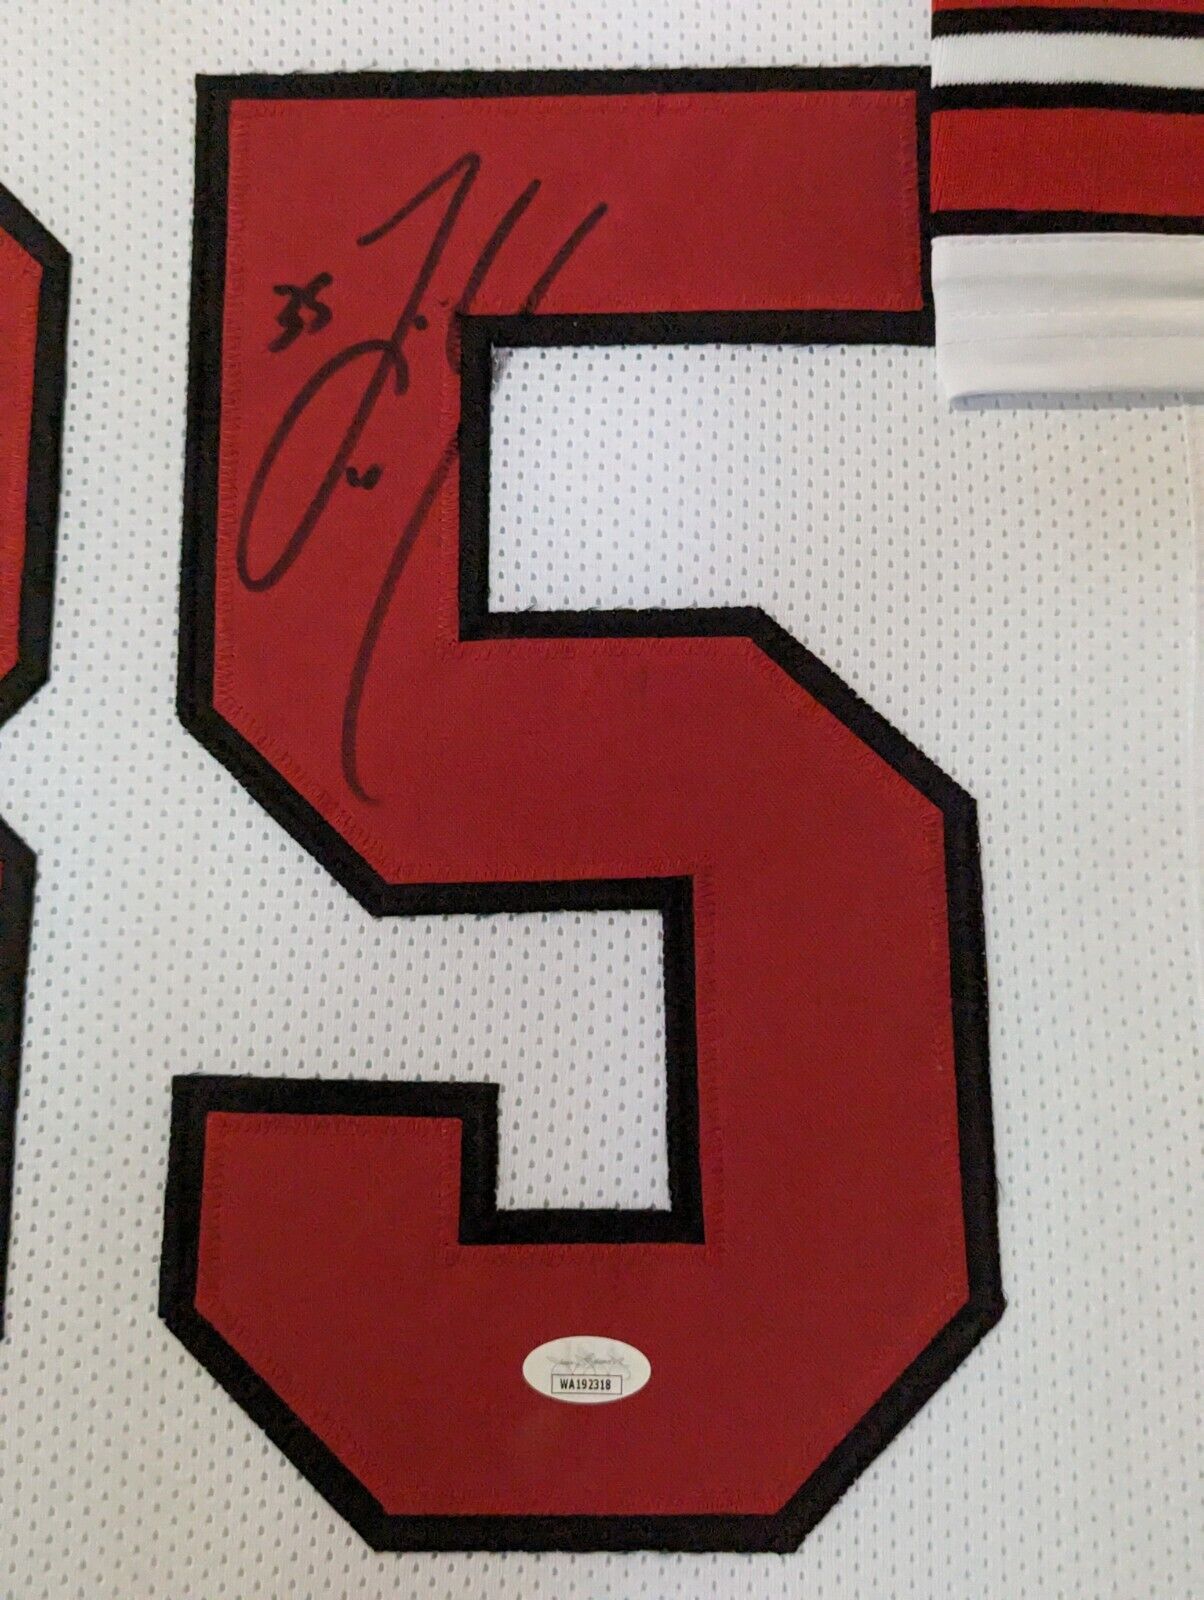 Framed Texas Tech Red Raiders Zach Thomas Autographed Signed Jersey Jsa Coa